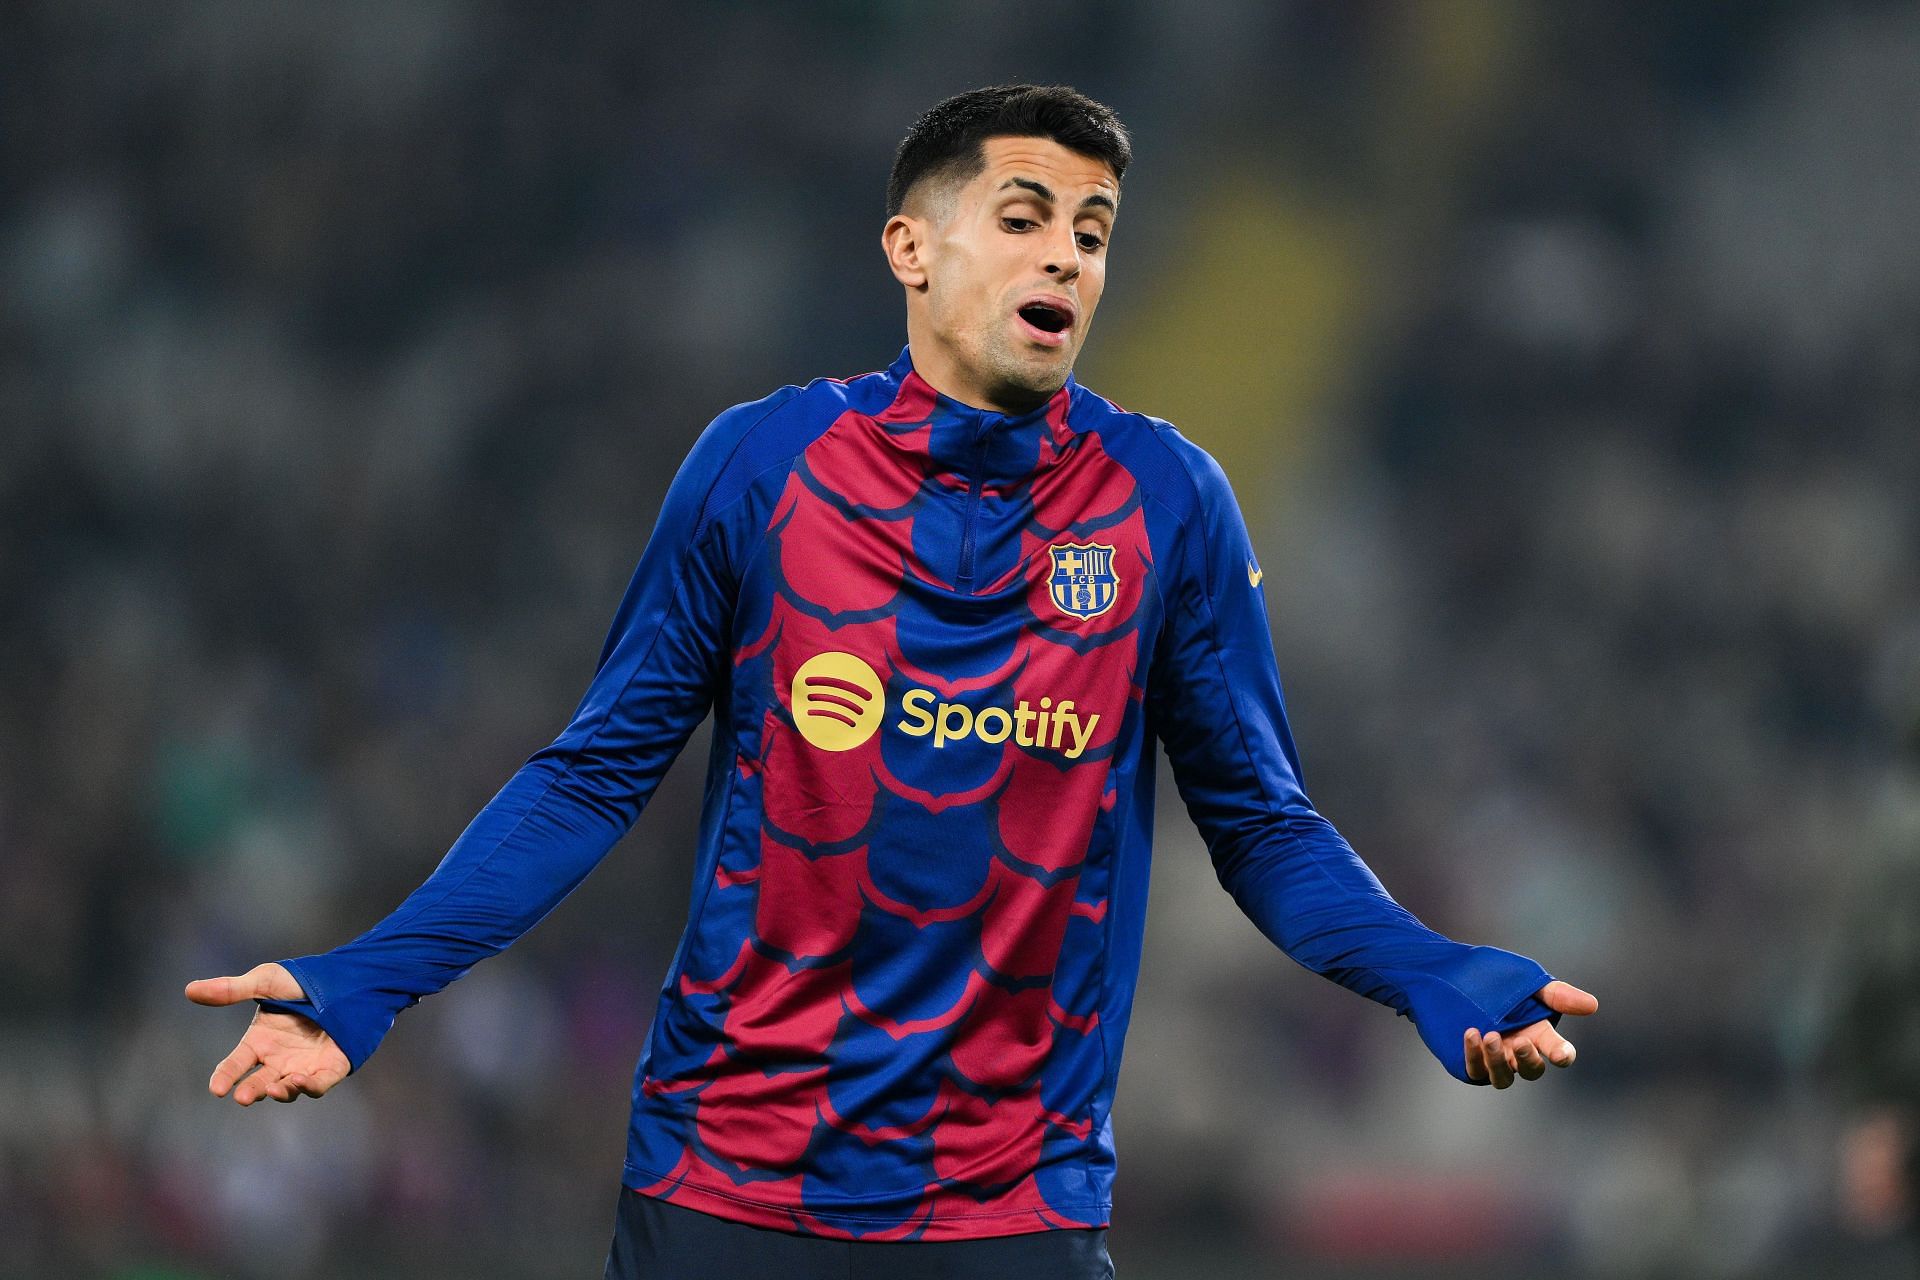 Joao Cancelo has hit the ground running at the Camp Nou.